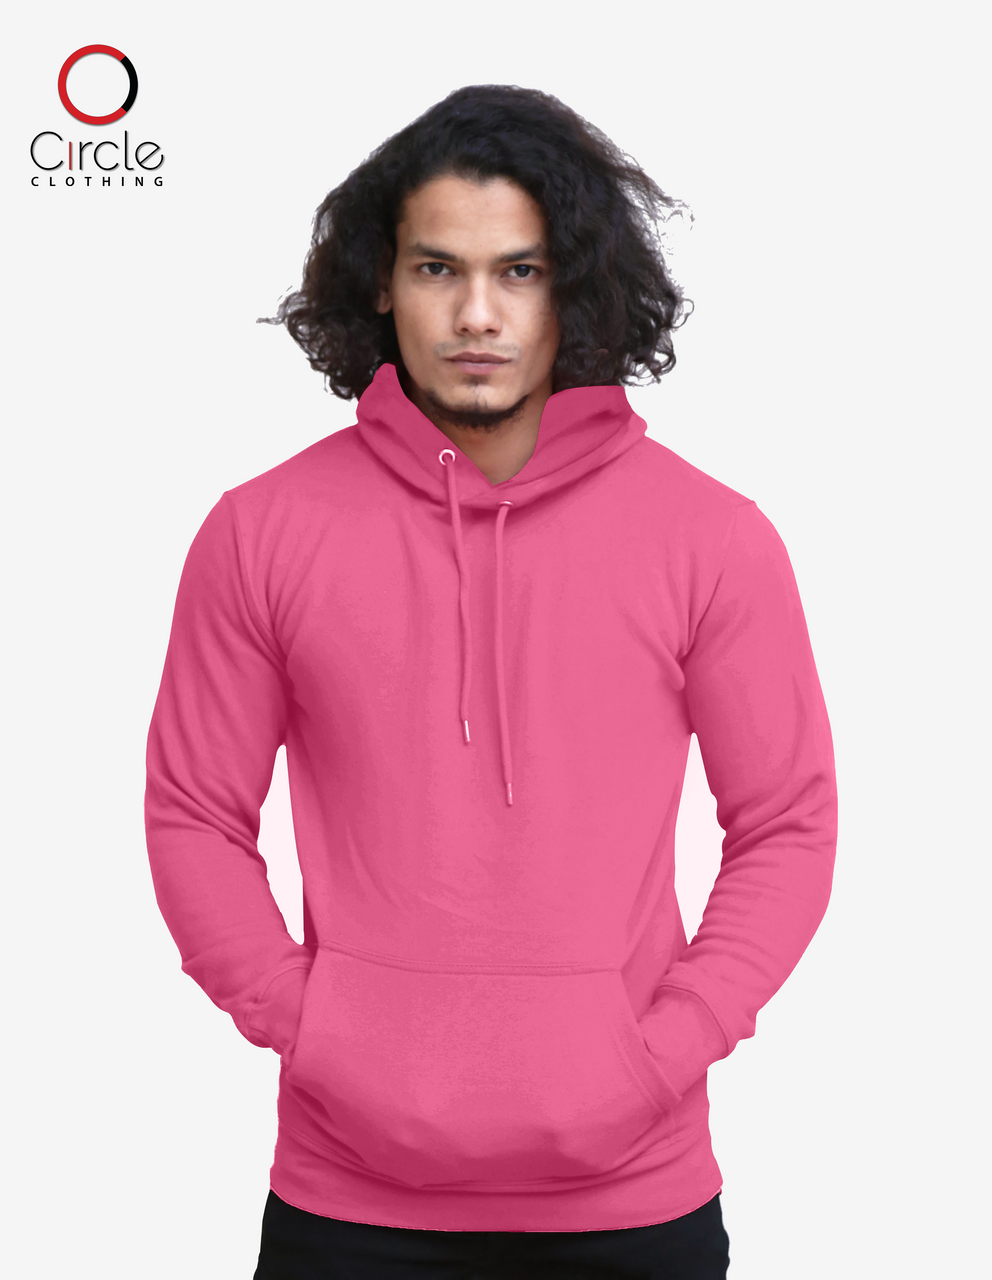 Circle Clothing - Unisex Fleece Perfect Pullover Hoodie 8.25 Oz - 2790